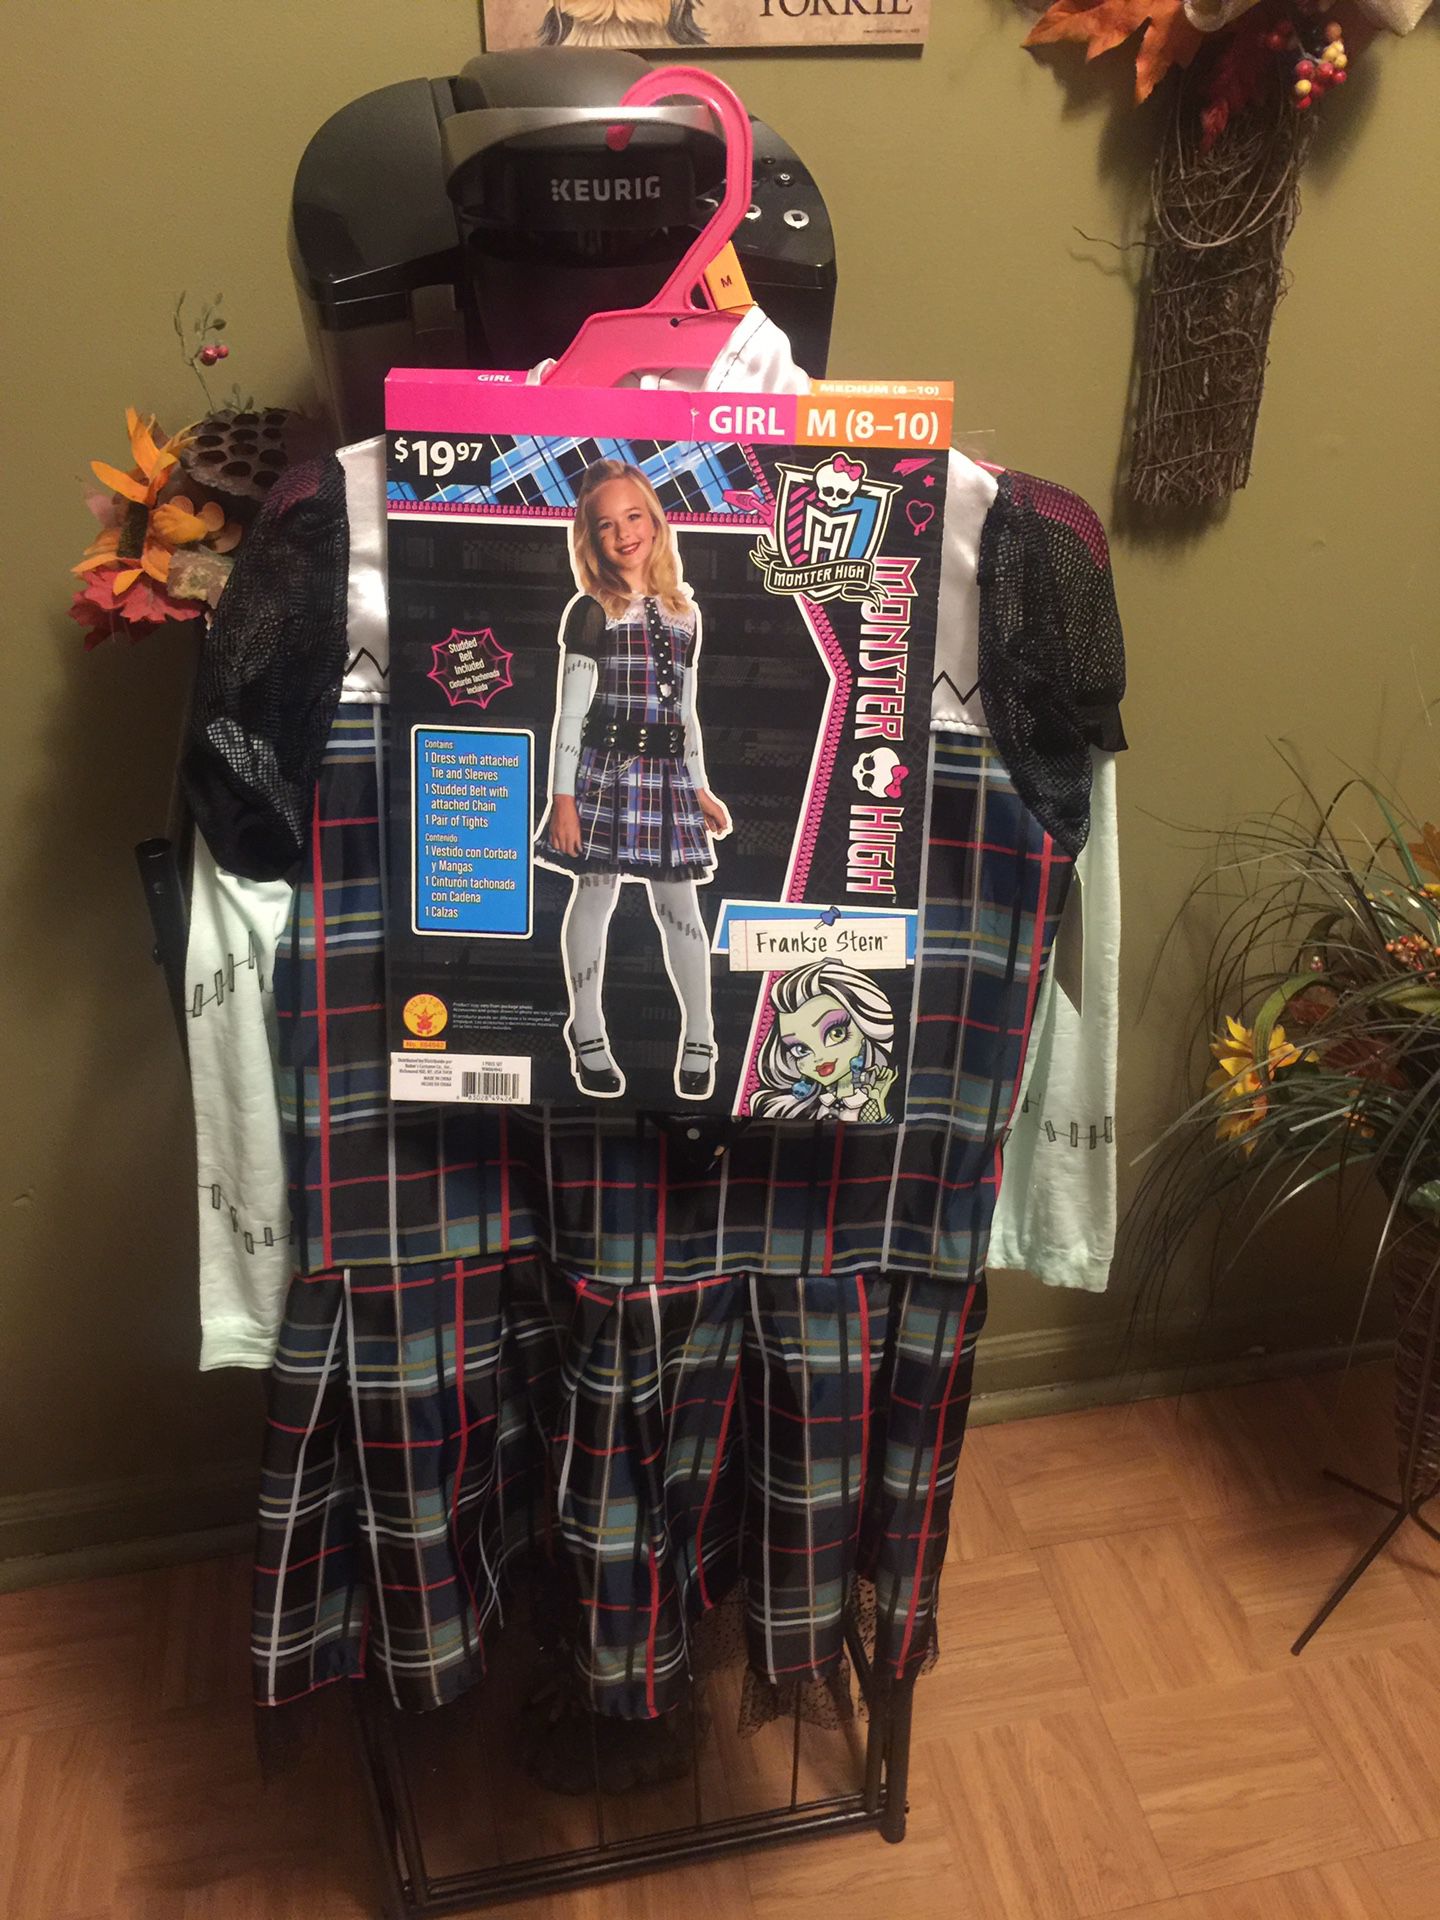 Girls size 8 to 10 monster high costume new never worn